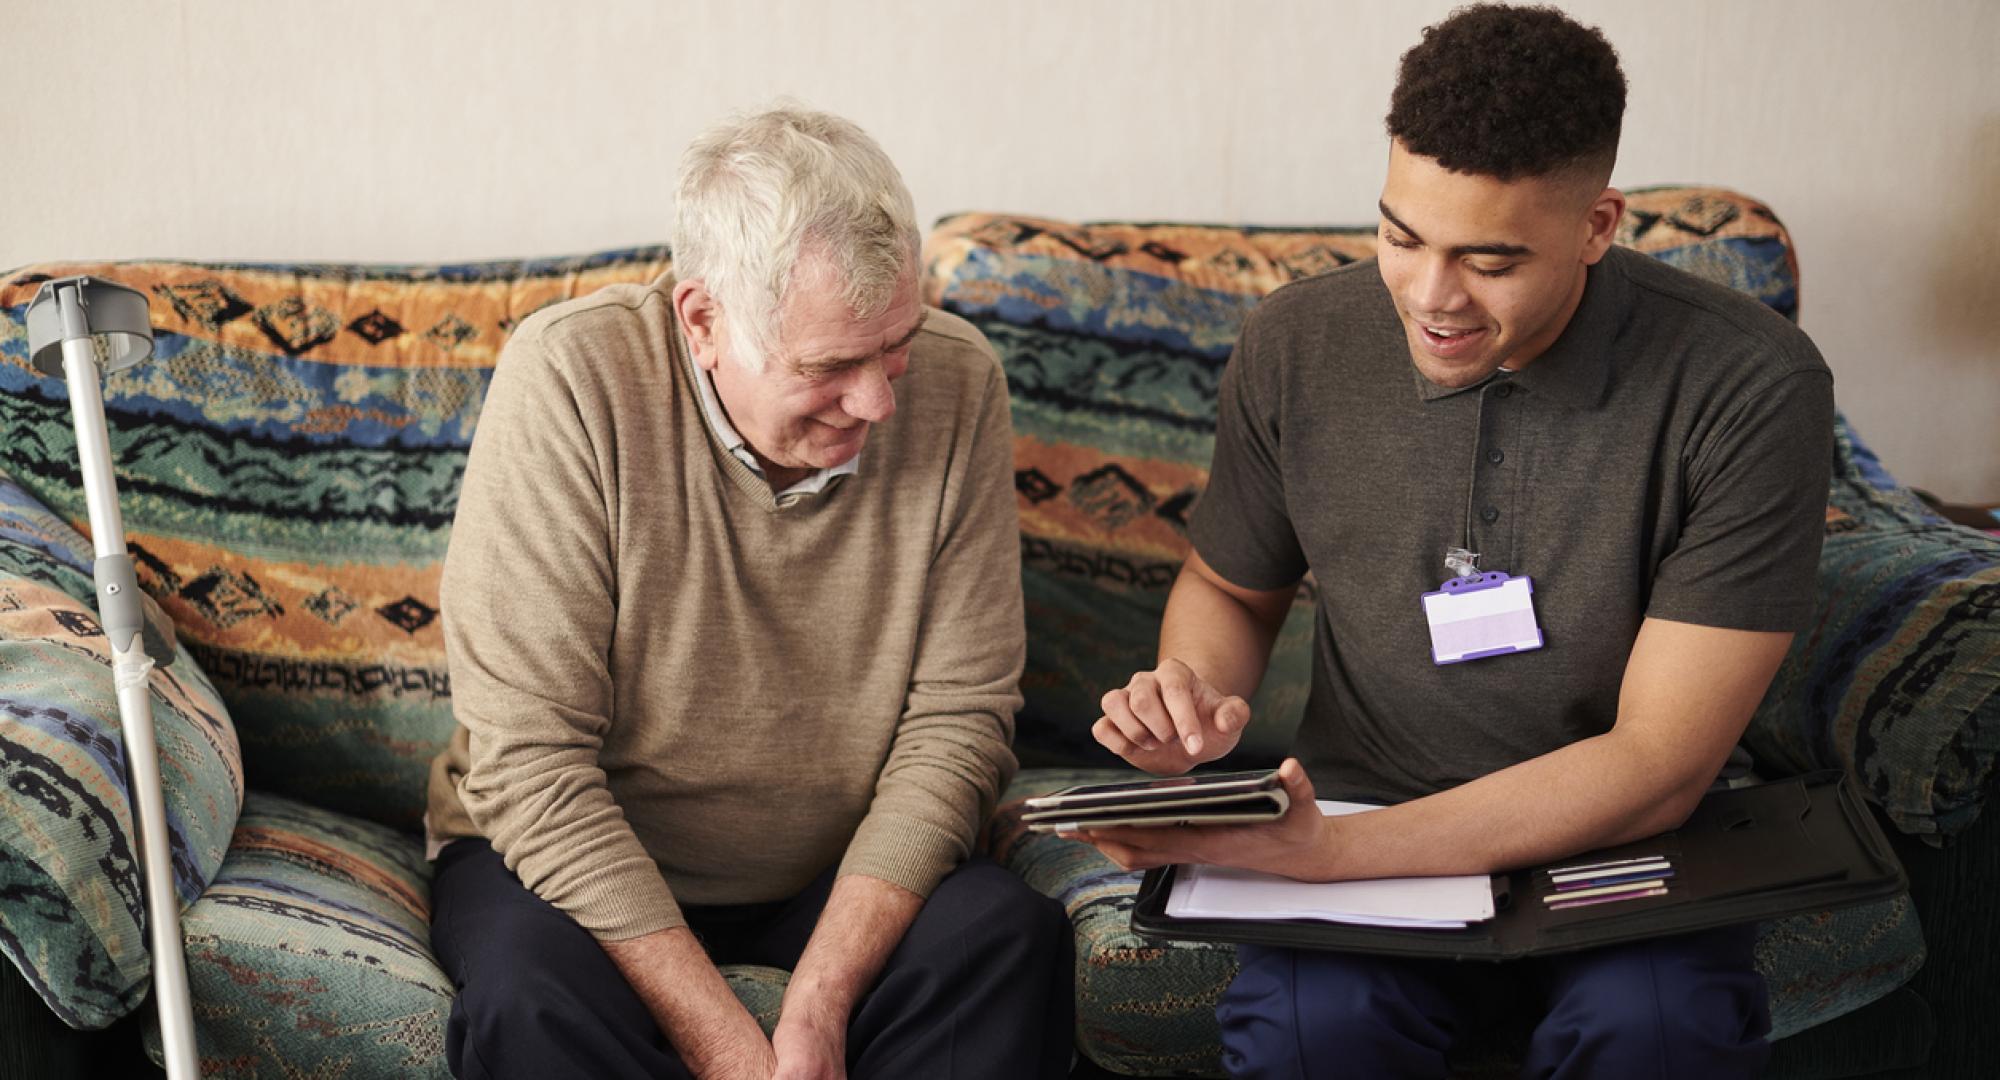 Carer using an iPad with a patient